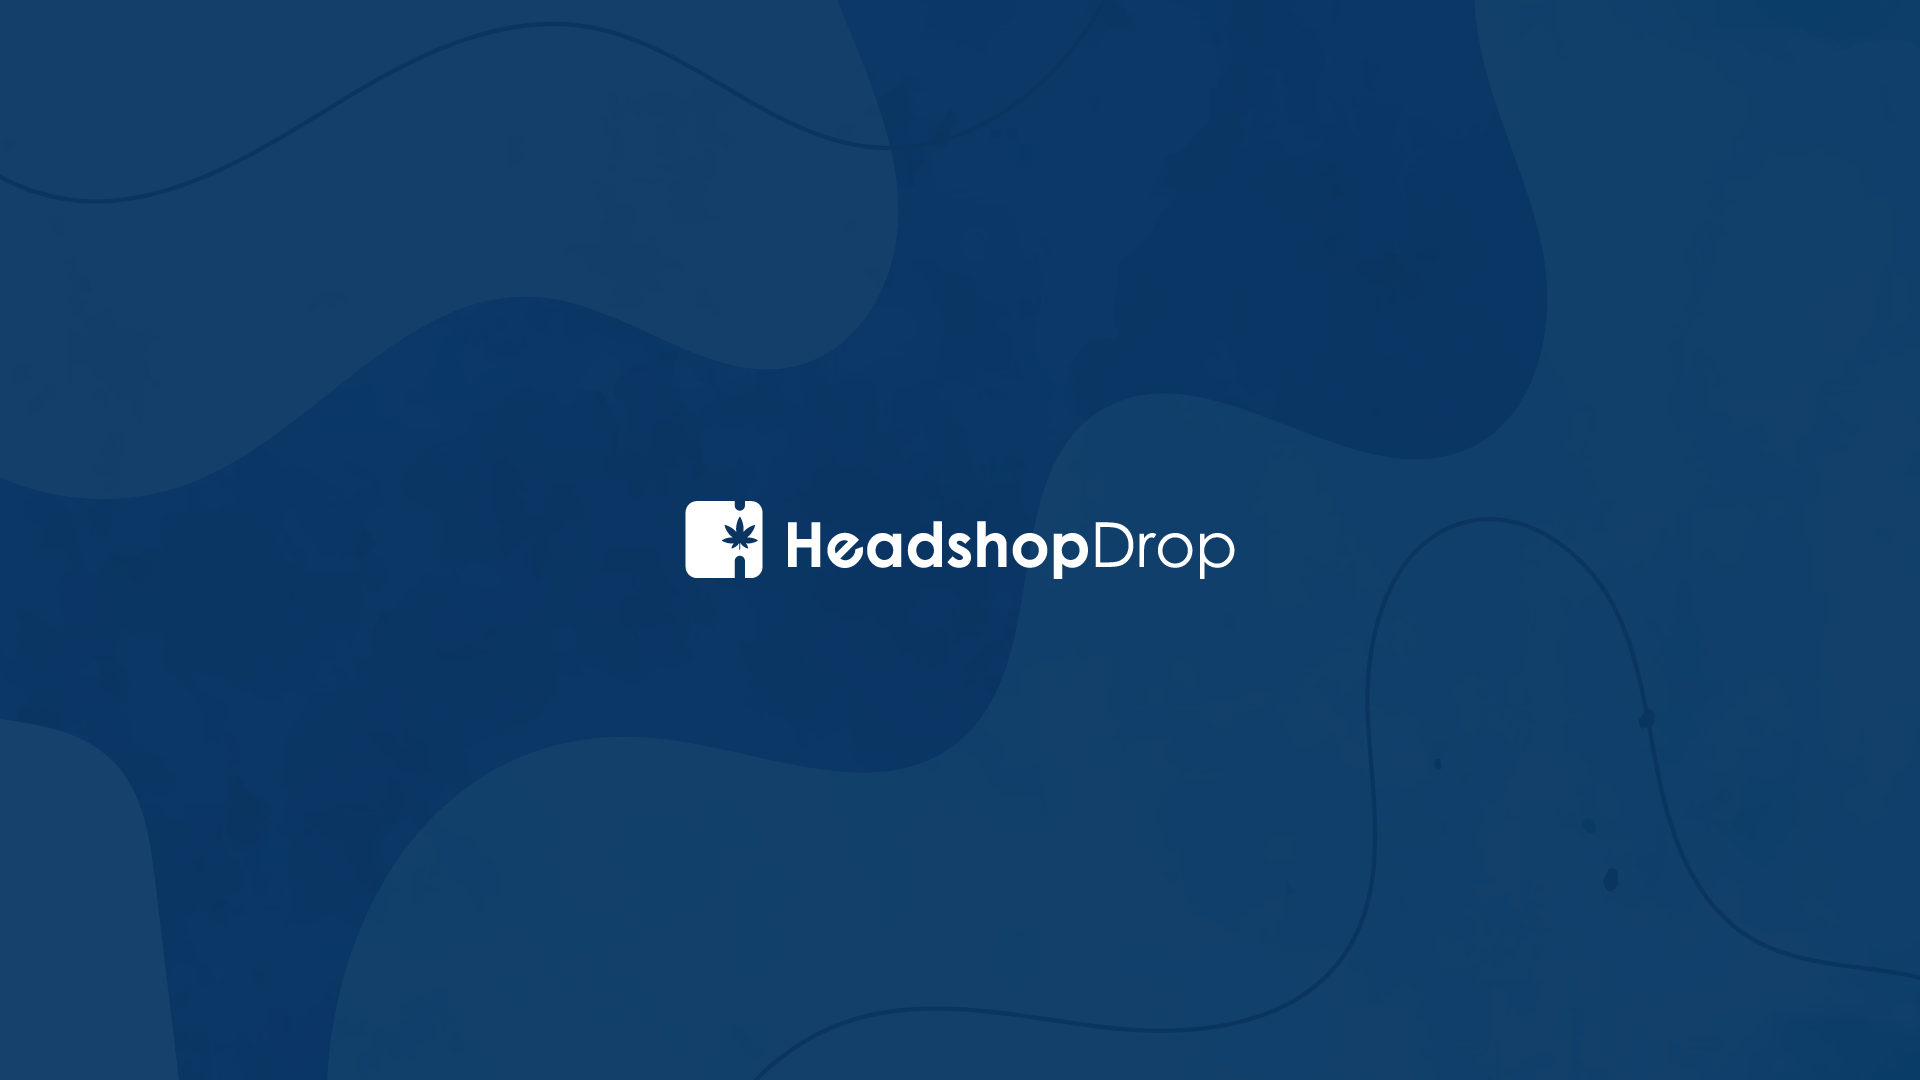 Load video: Headshop Drop 30 seconds length of Introduction Video footage